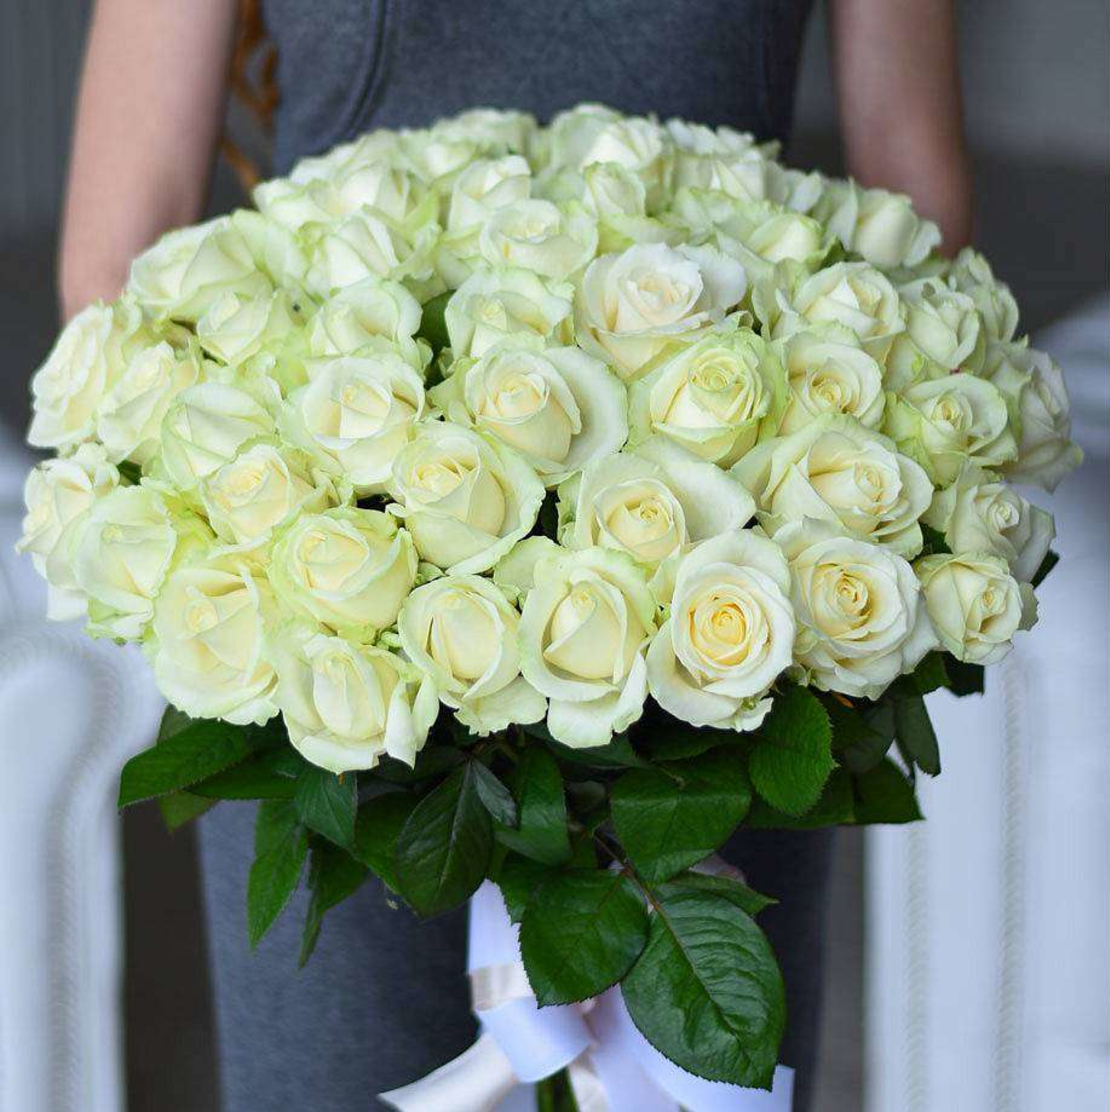 Bouquet of 55 White Roses # 27